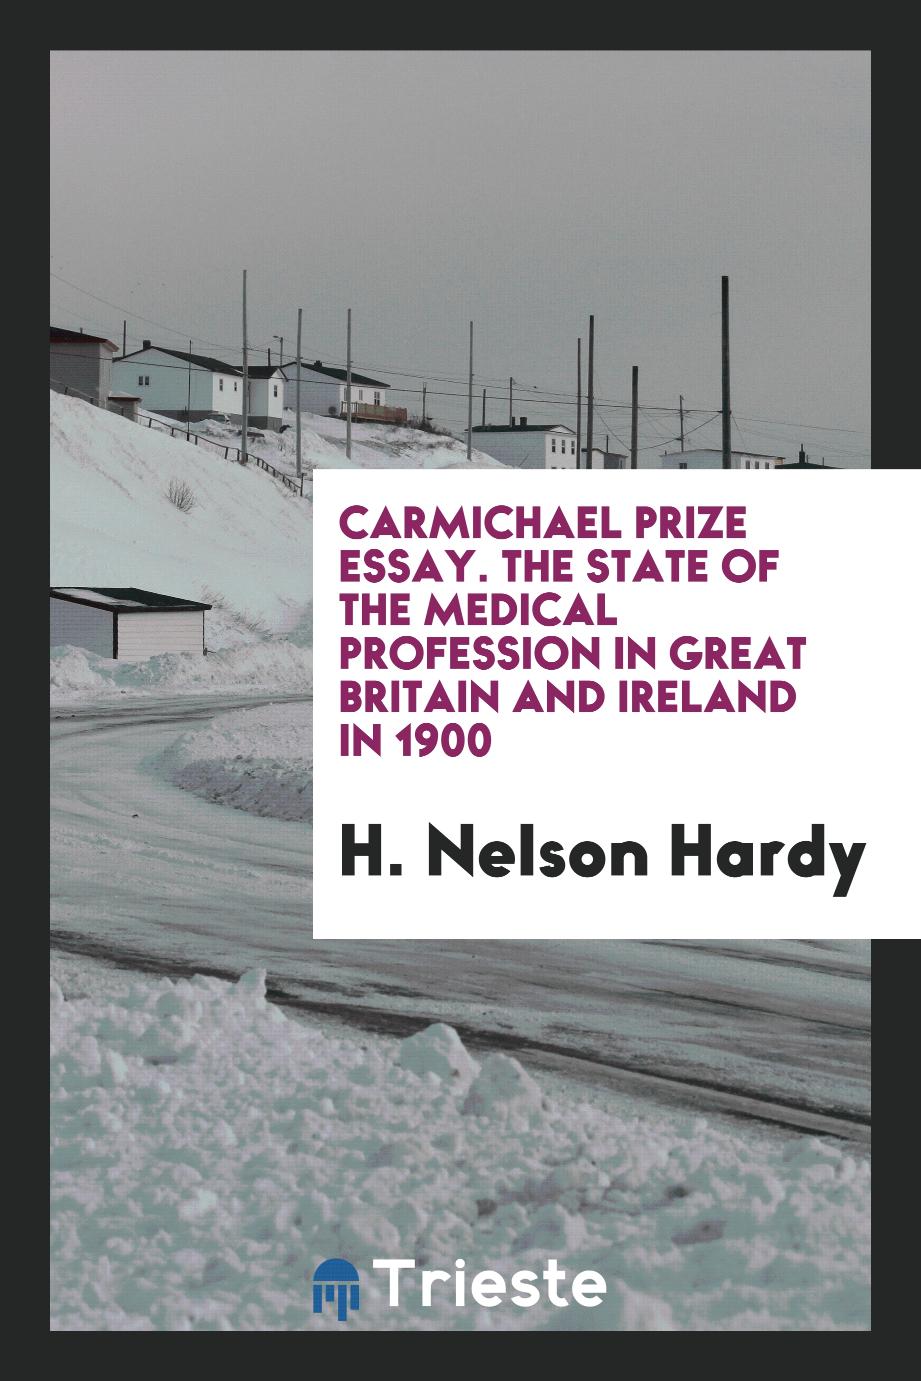 Carmichael Prize Essay. The State of the Medical Profession in Great Britain and Ireland in 1900